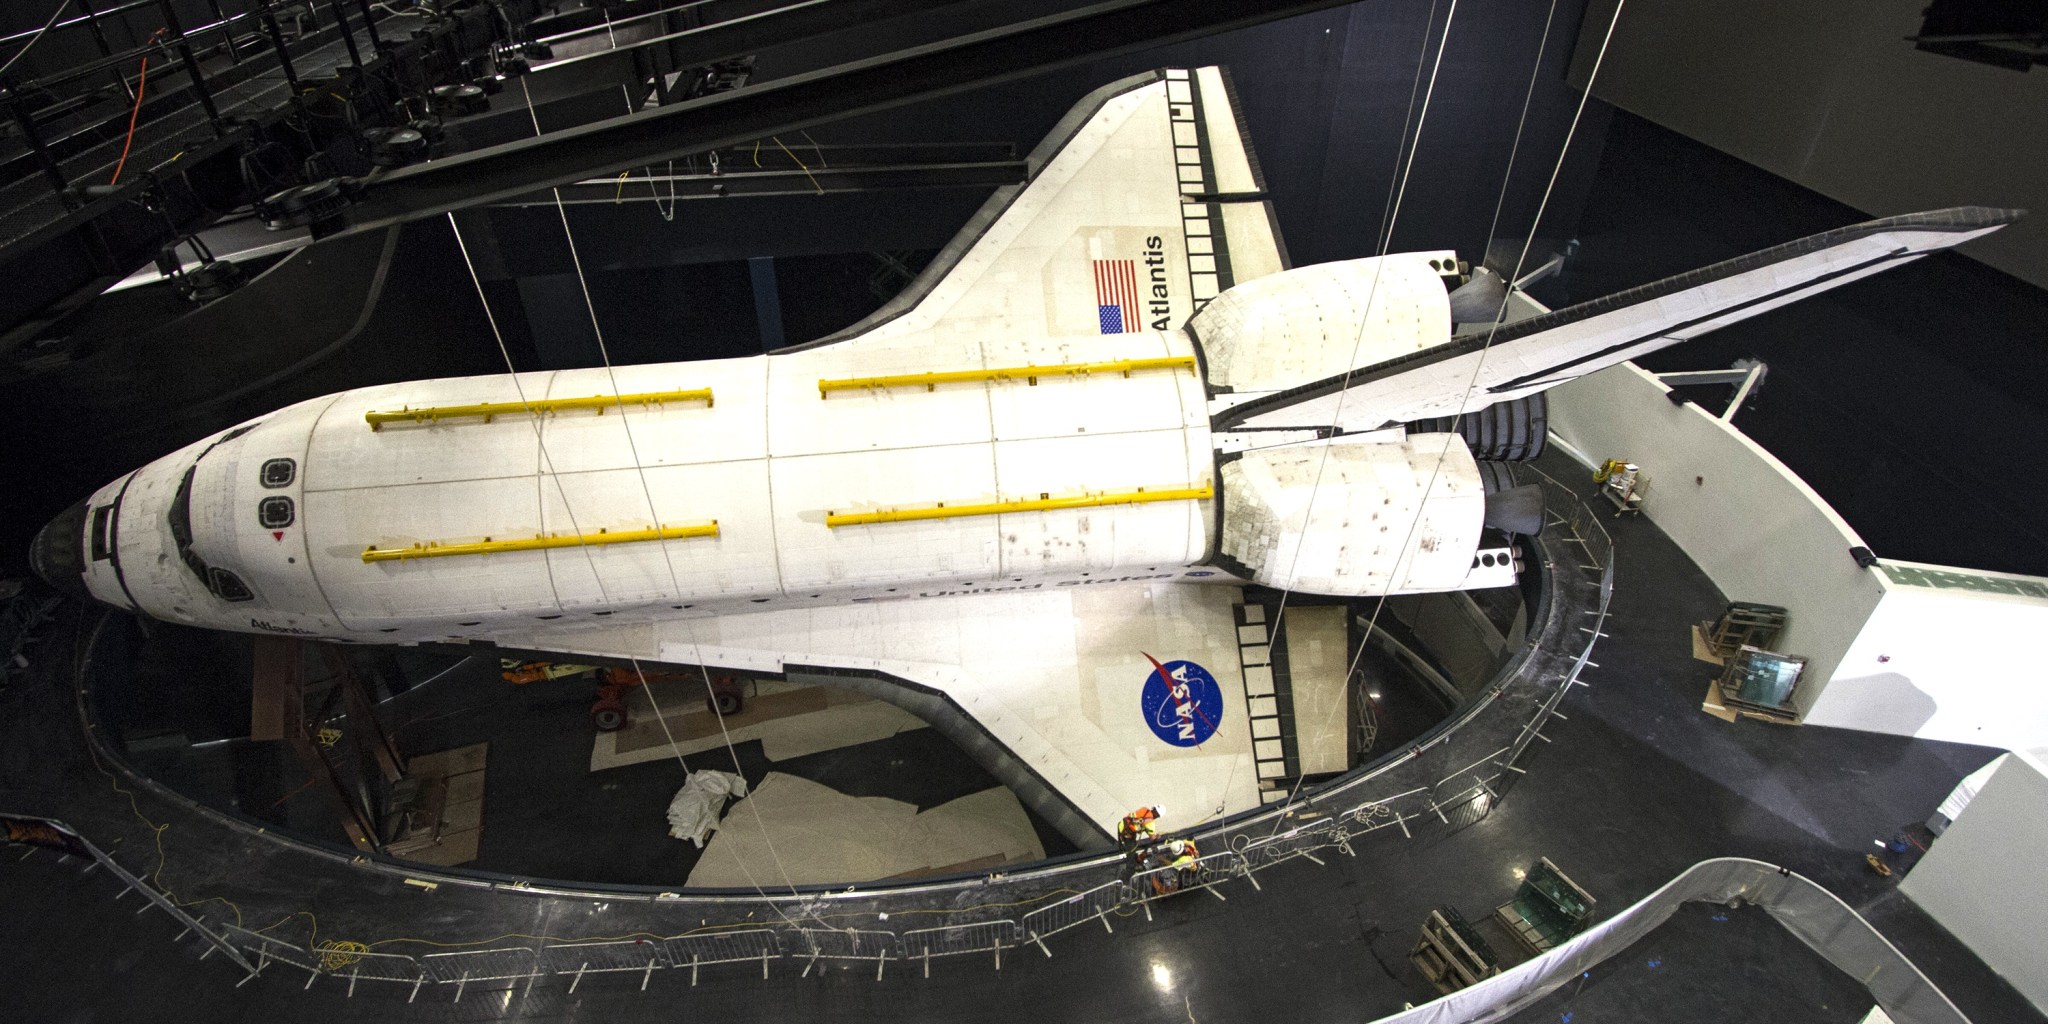 Construction crews completed removal of plastic shrink-wrap from the shuttle Atlantis on April 26.